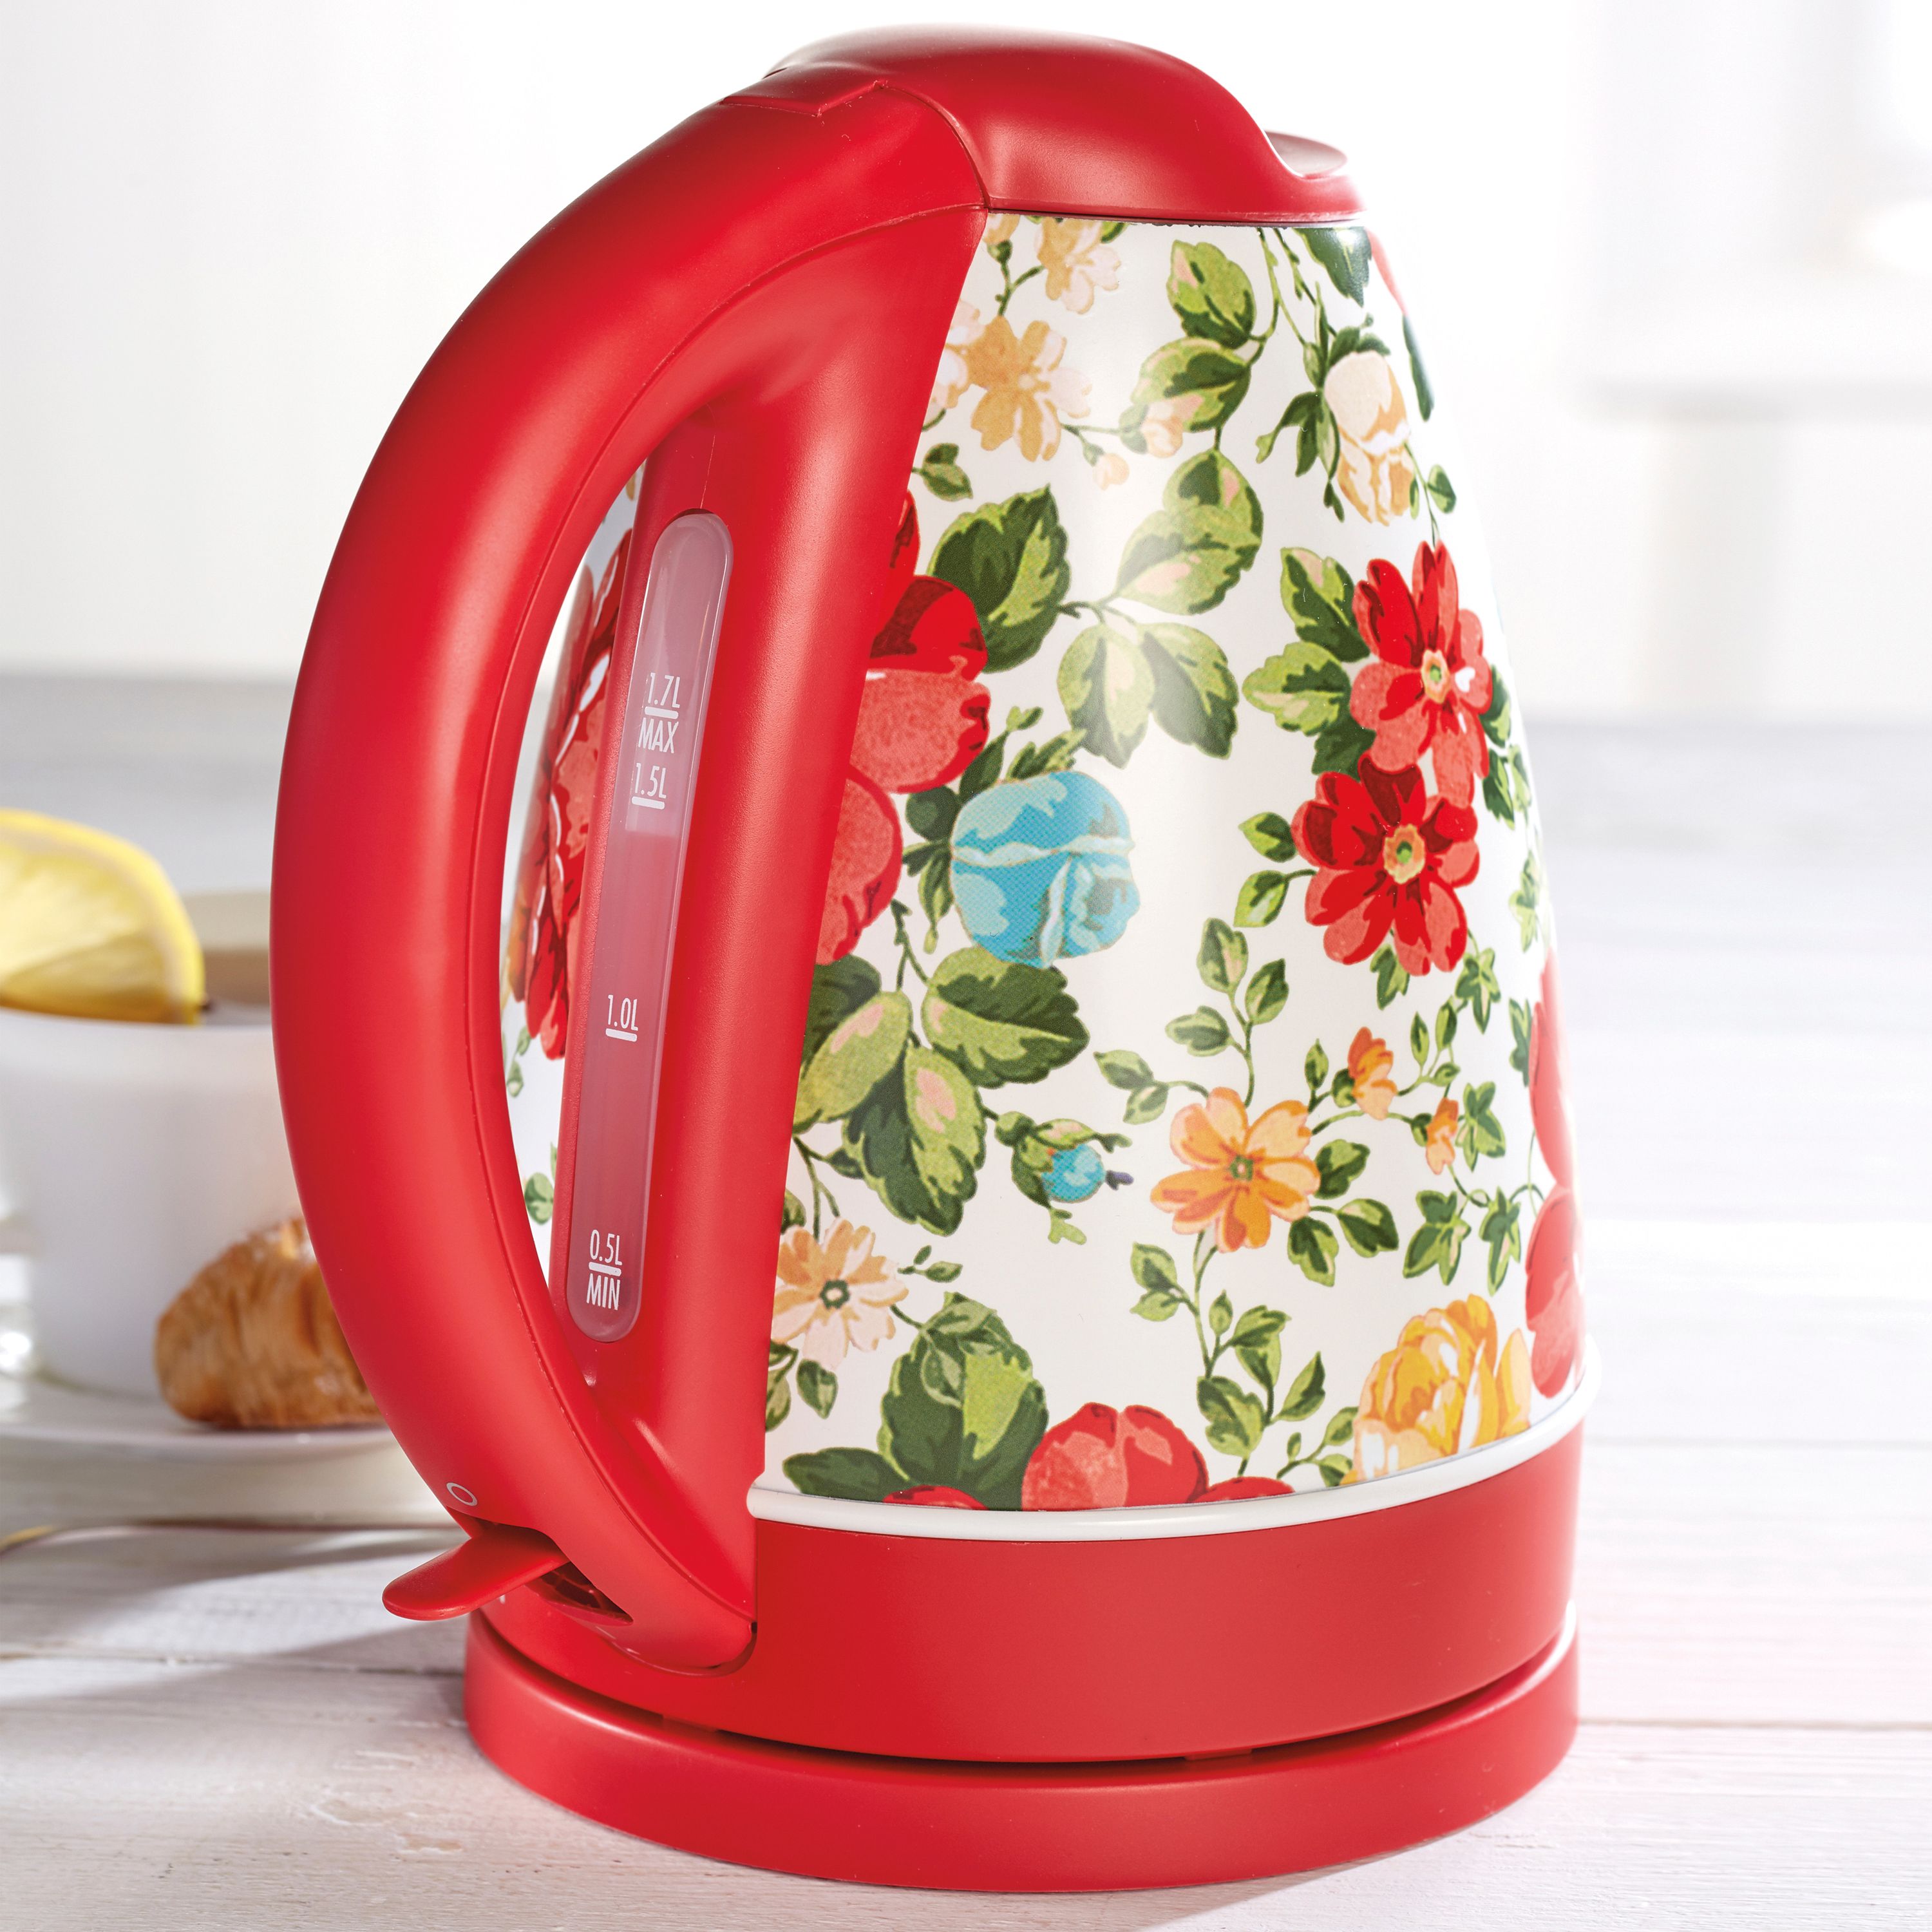 The Pioneer Woman Electric Kettle, Vintage Floral Red, 1.7-Liter, Model 40972 - image 4 of 10